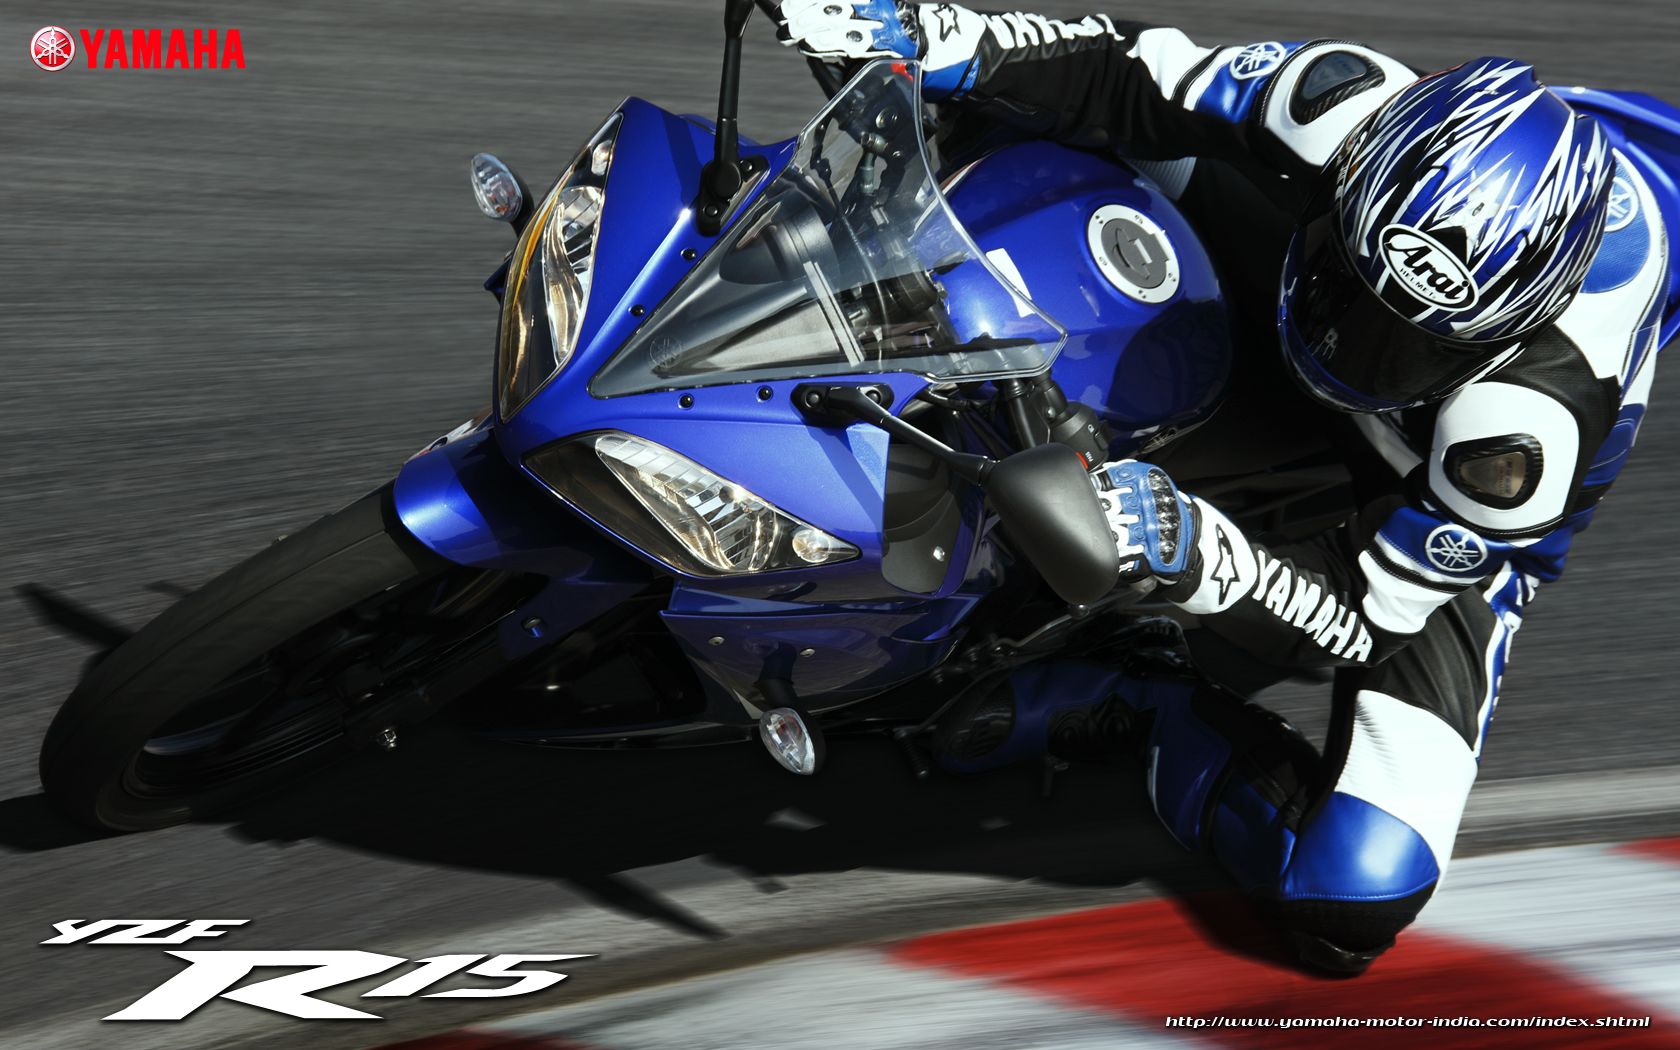 Yamaha Yzf R15 Wallpaper R15 Special Edition, Download